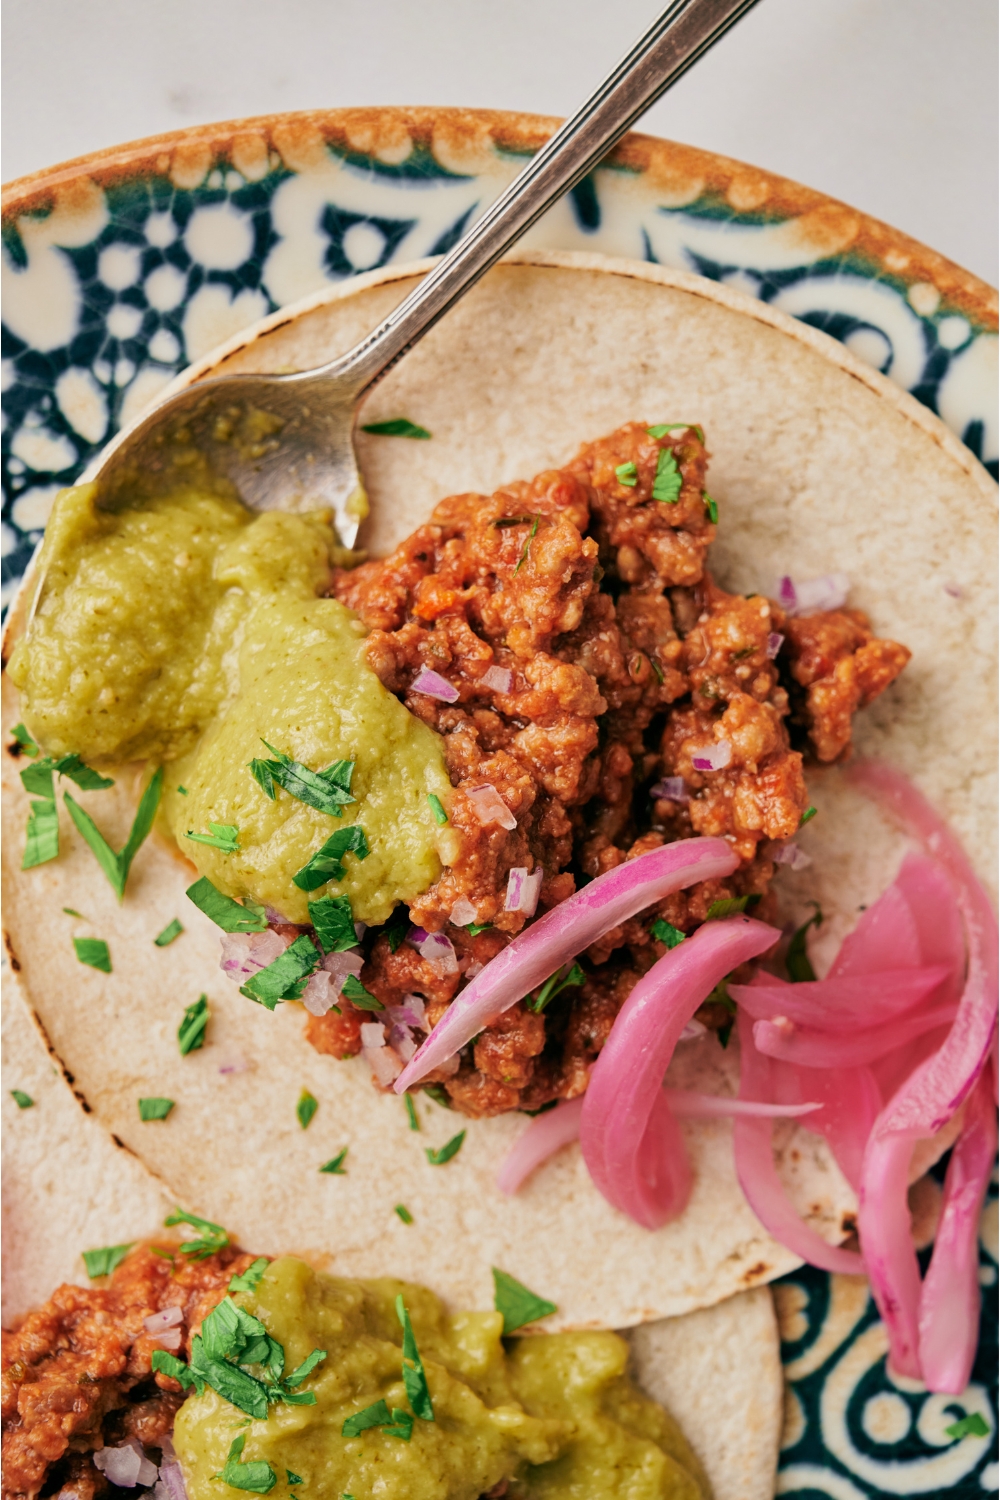 A taco topped with seasoned taco meat, diced red onion, pickled red onion, fresh herbs, and a spoonful of green salsa with a spoon still on the plate.